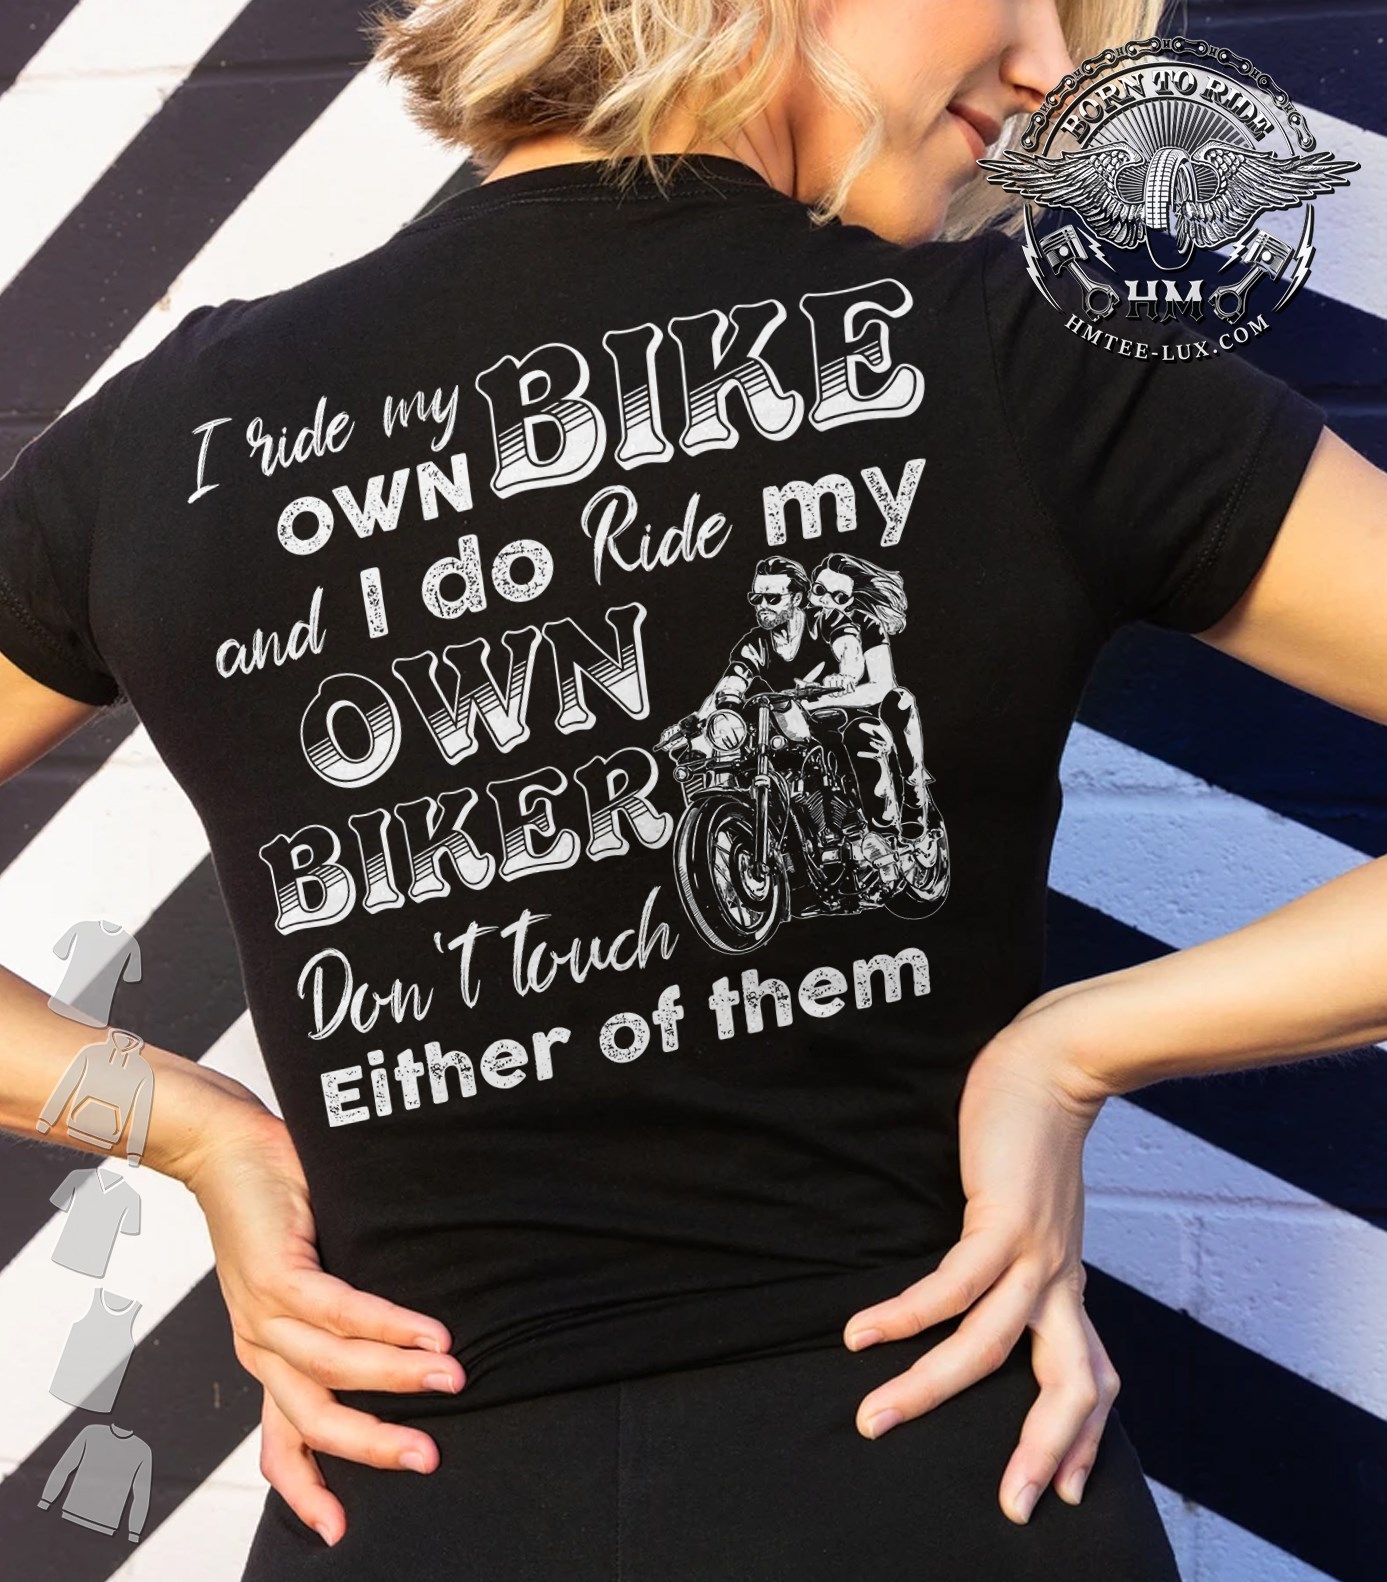 I ride my own bike and I do ride my own biker - Husband and wife, riding partners